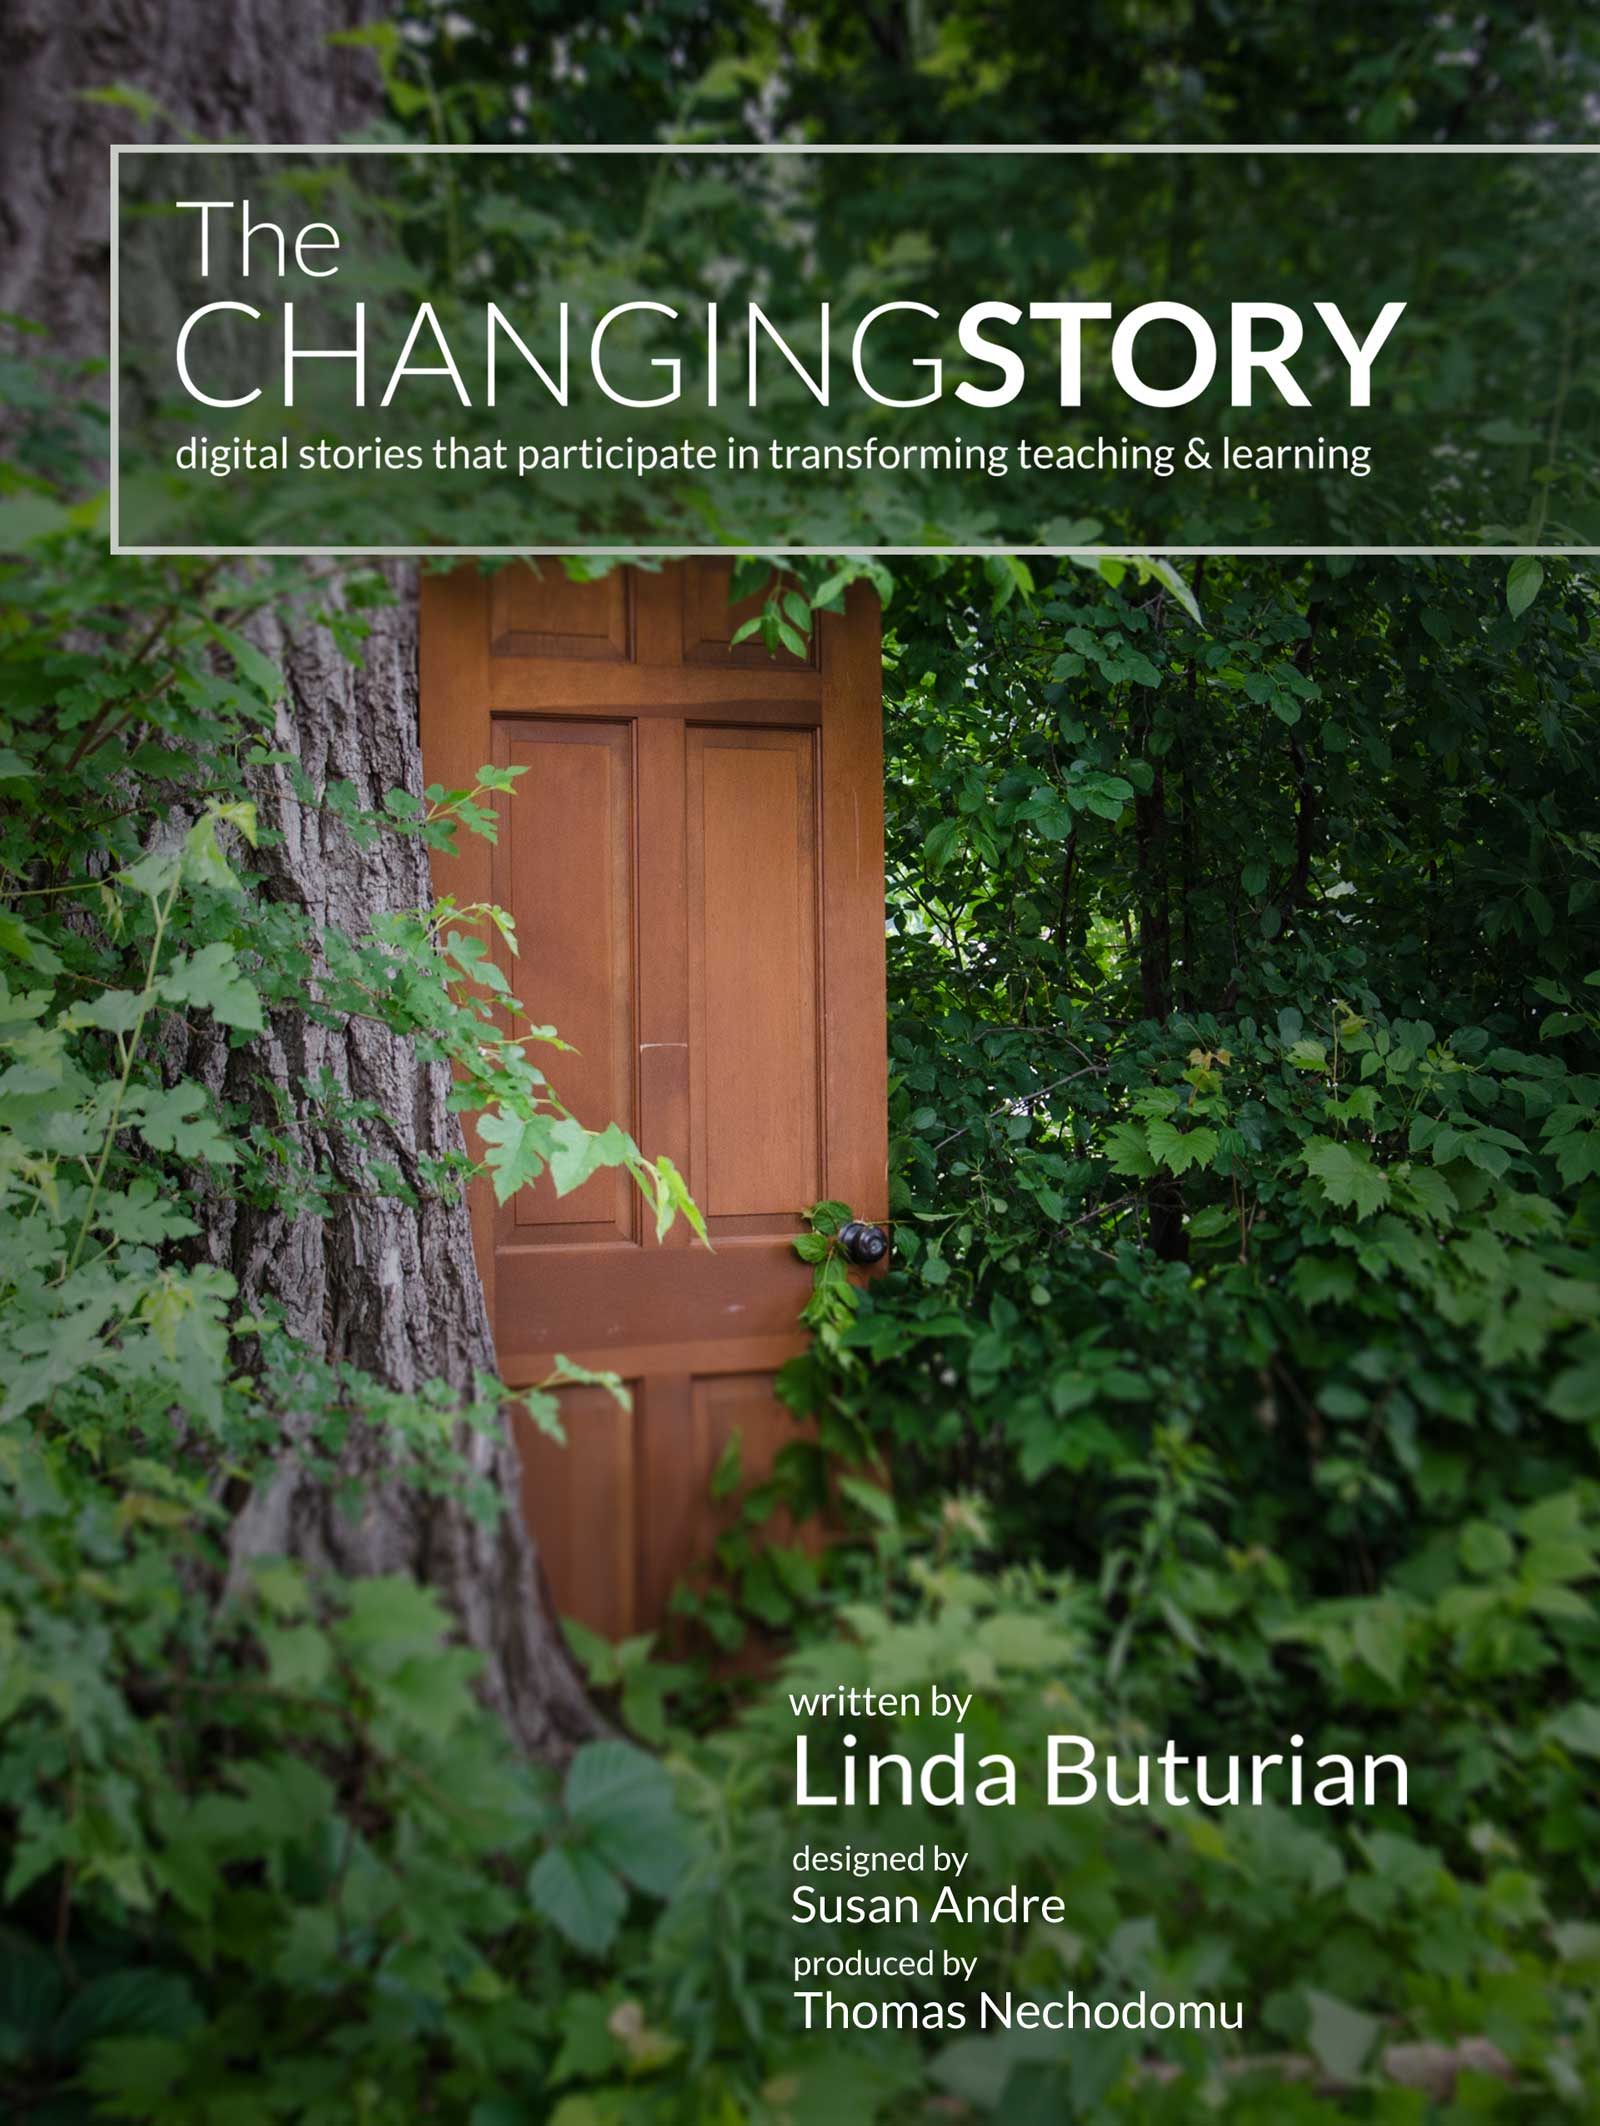 The Changing Story: digital stories that participate in transforming teaching and learning, written by Linda Buturian, designed by Susan Andre, and produced by Thomas Nechodomu